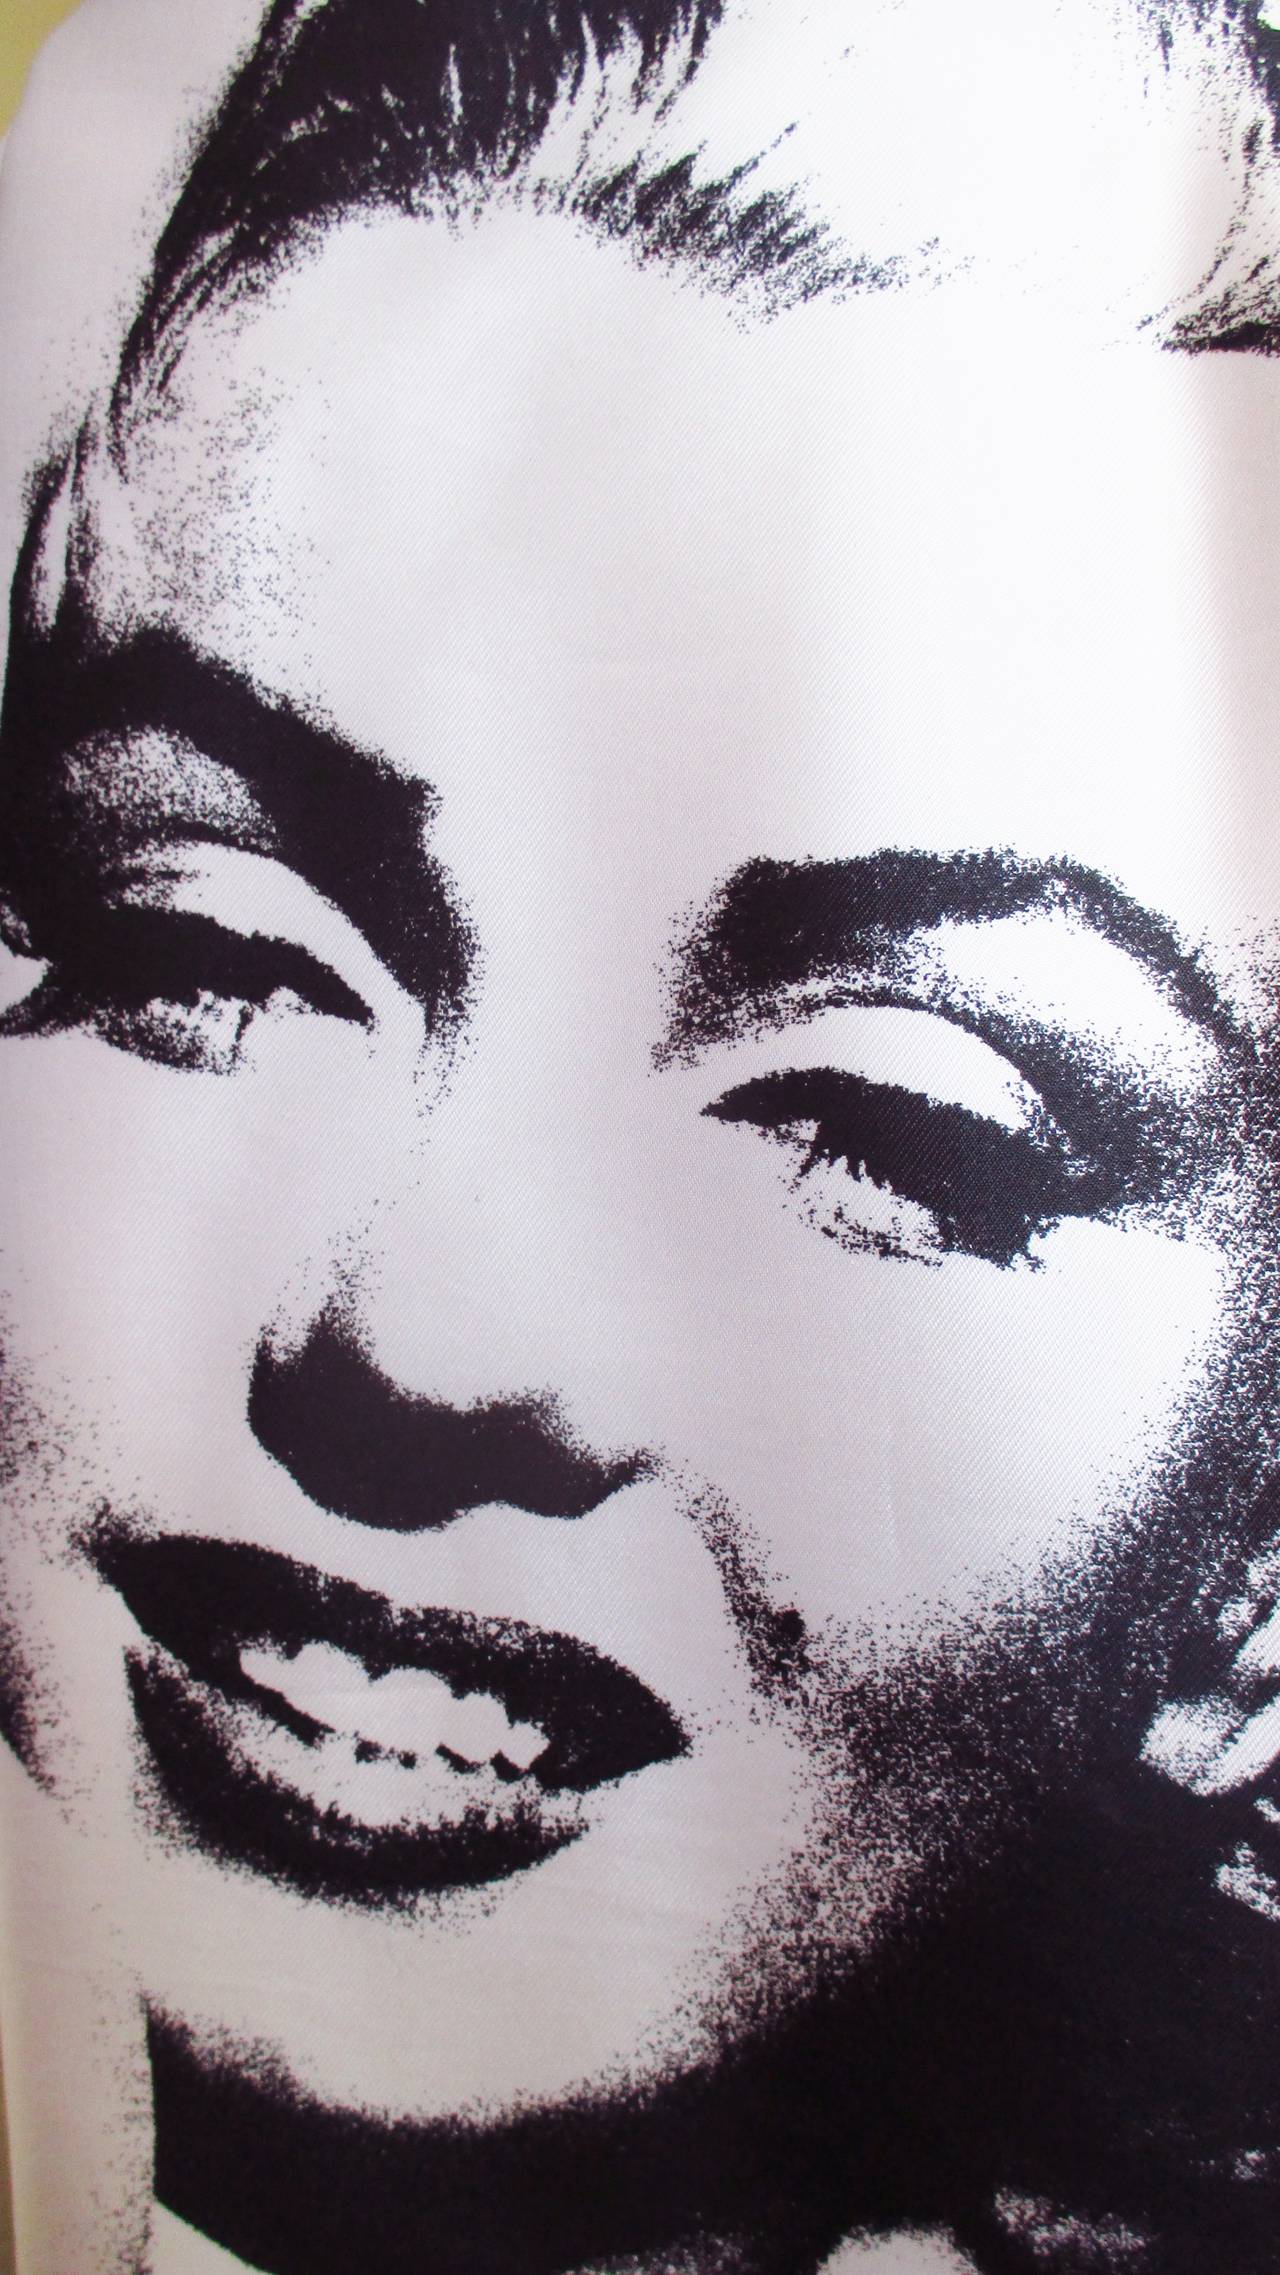 Dolce & Gabbana Marilyn Monroe Print Silk Skirt In Excellent Condition For Sale In Water Mill, NY